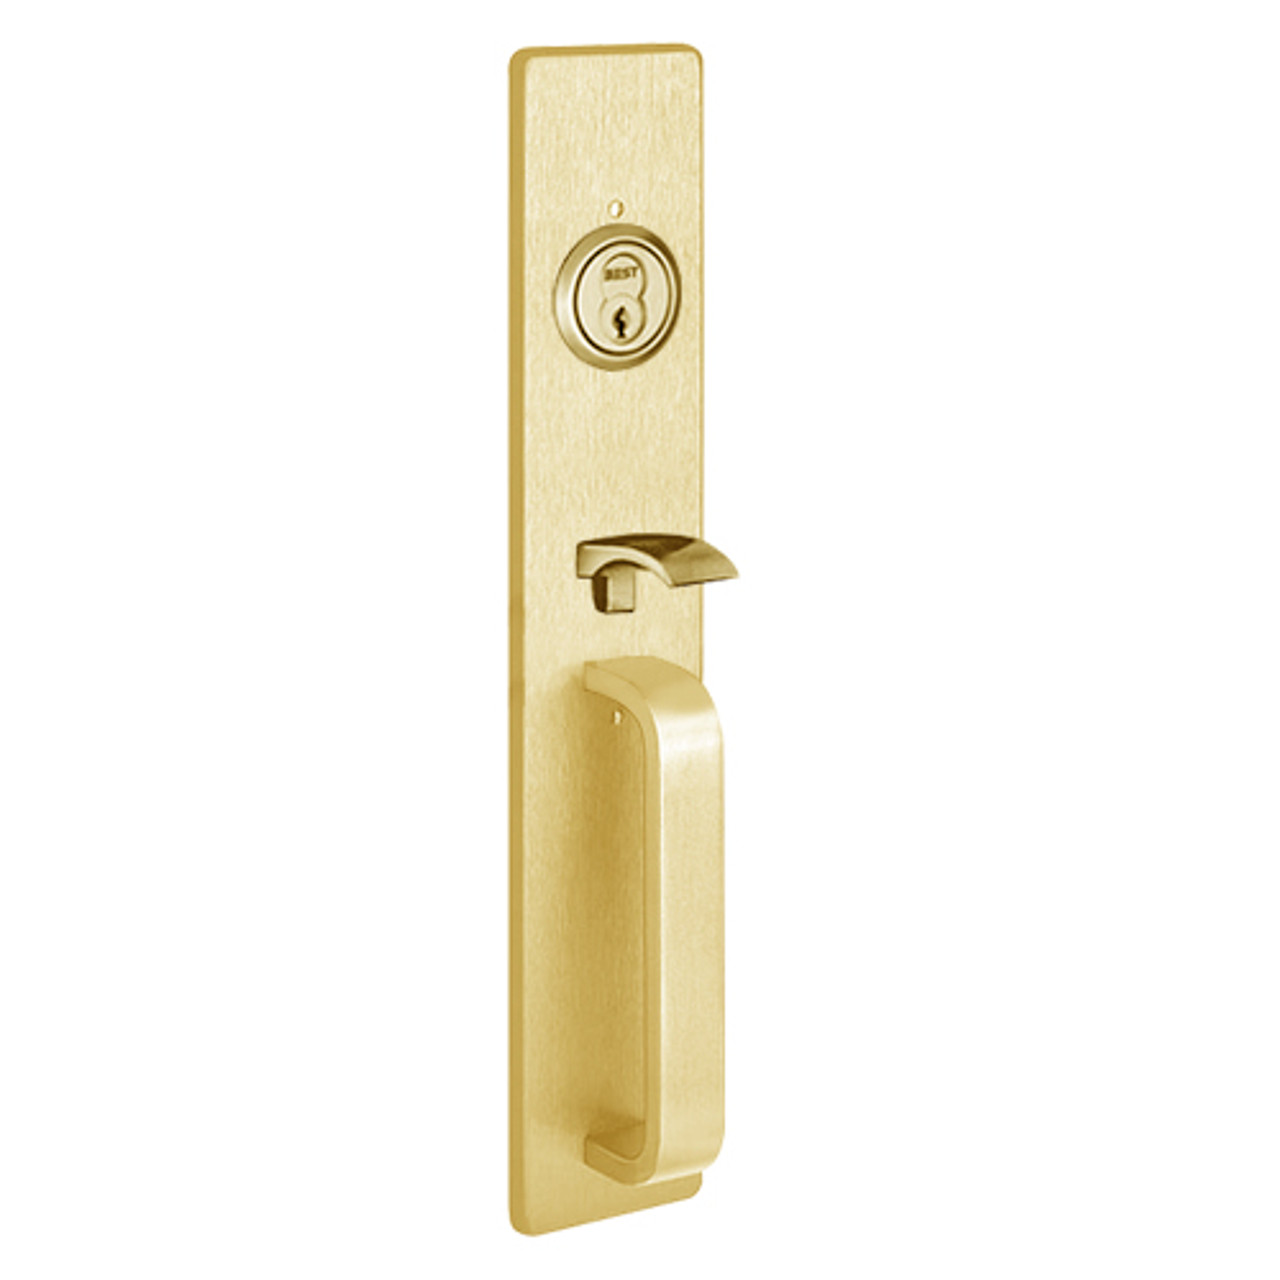 C1705A-605 PHI Key Controls Thumb Piece Trim with A Design Pull for Concealed Vertical Rod Device in Bright Brass Finish